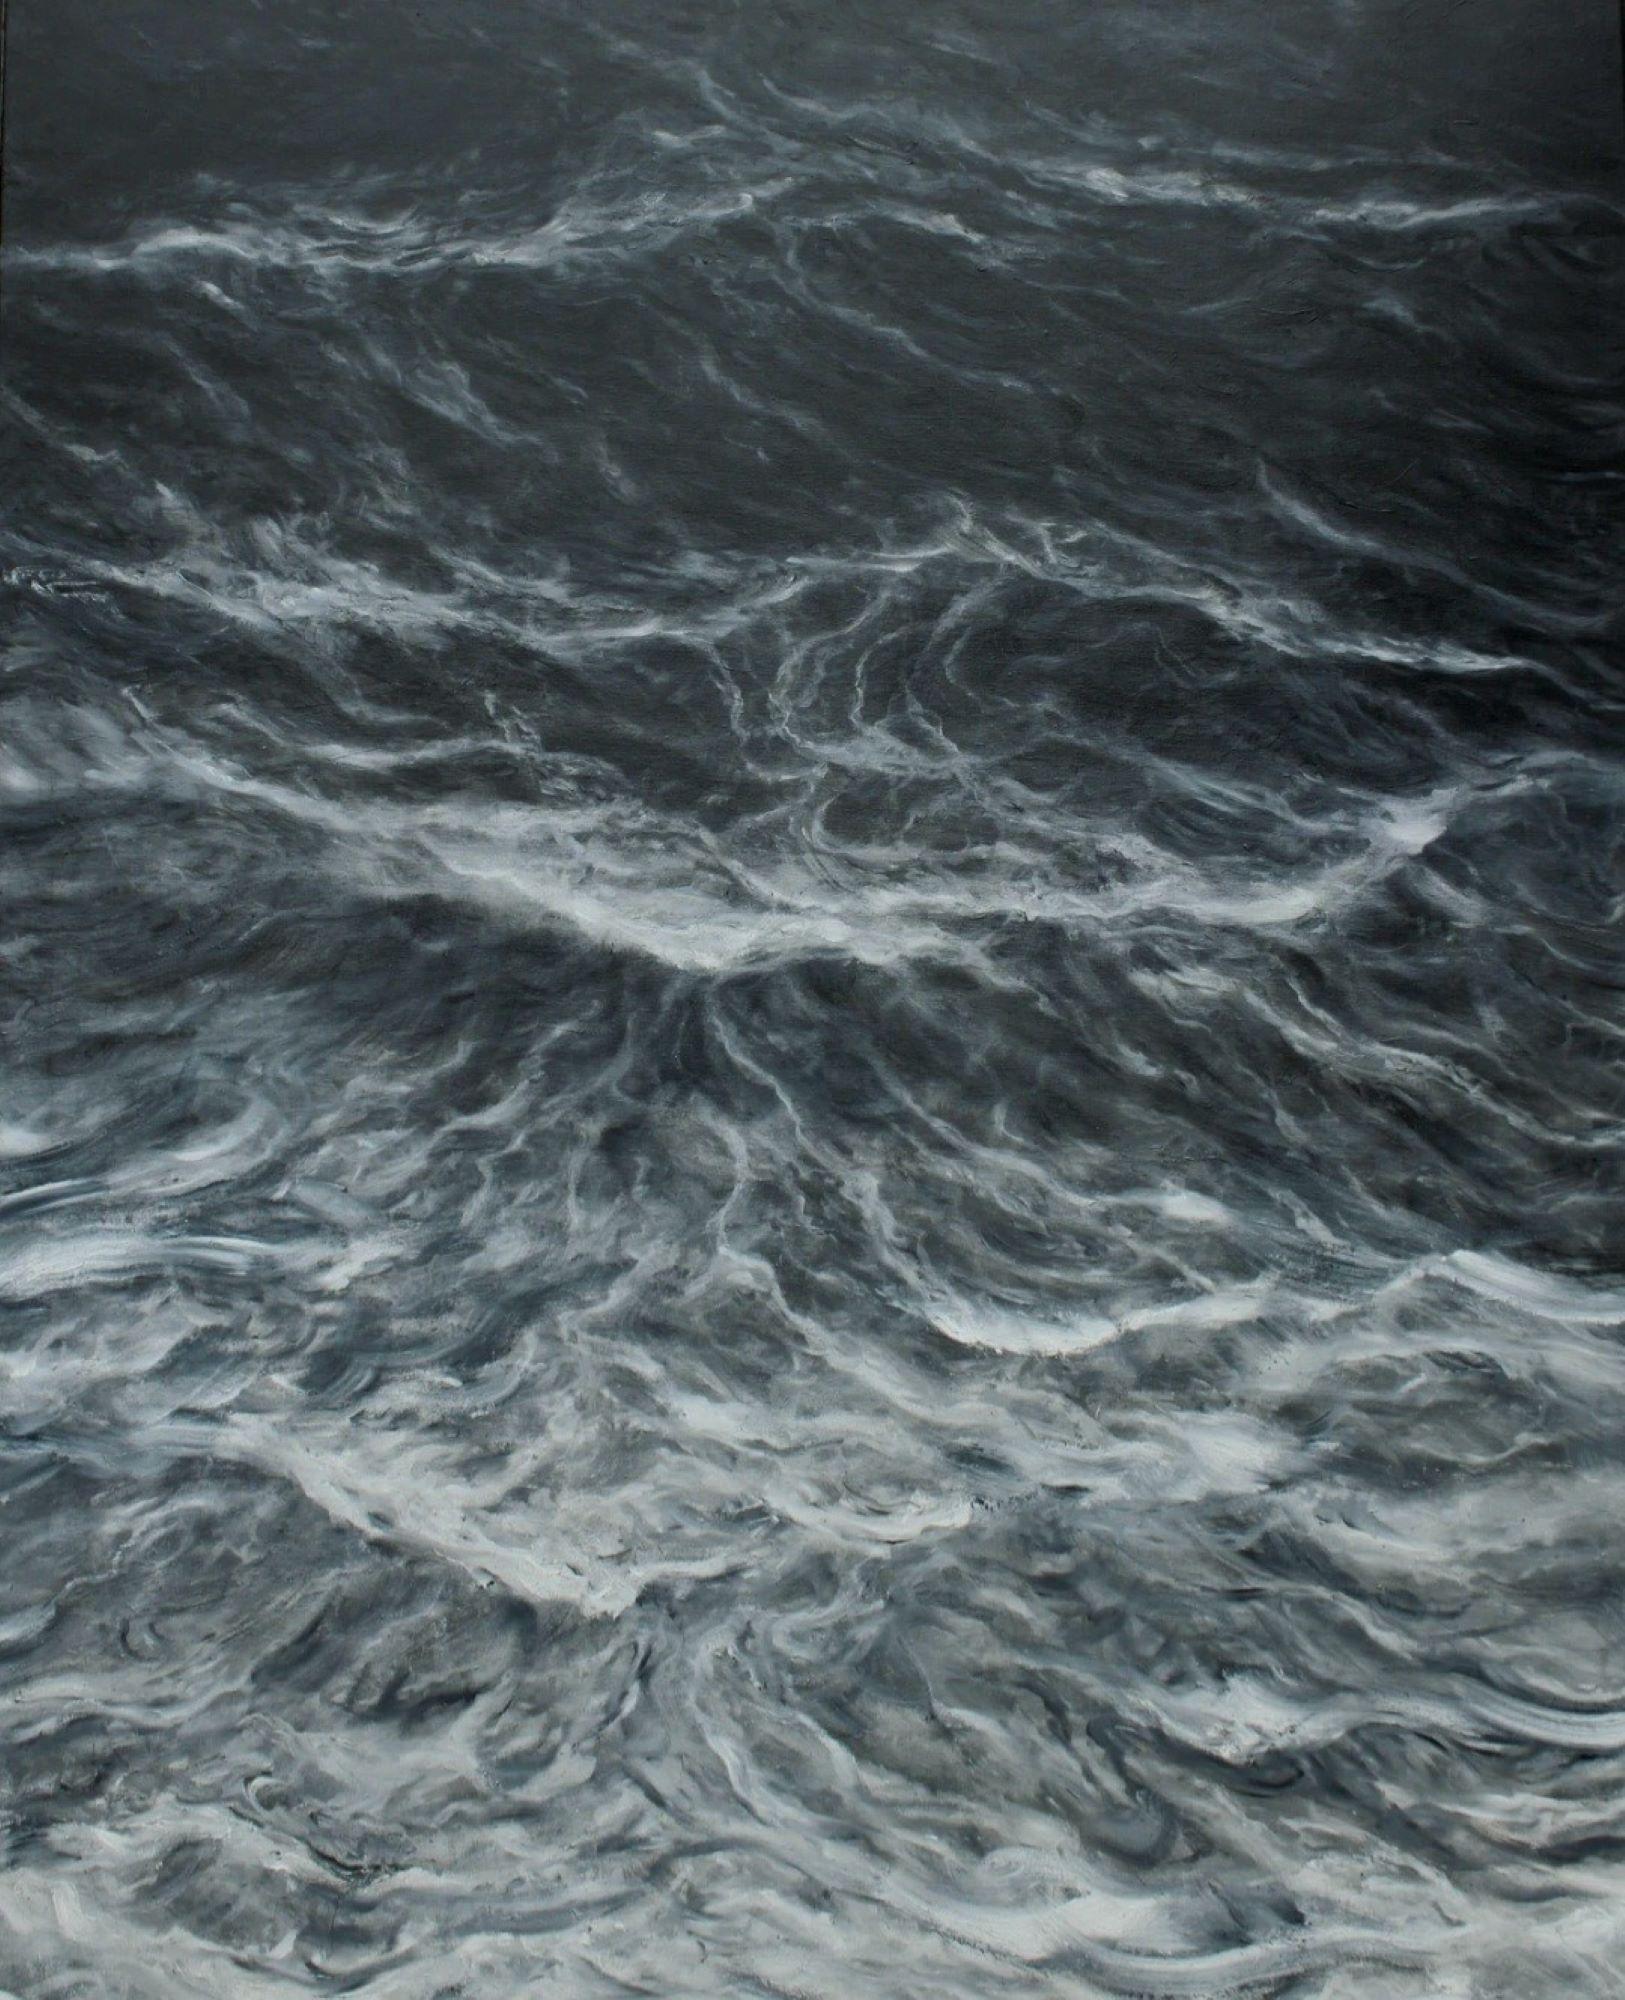 Abstract ocean is a unique mixed technique, pigments and charcoal fixed on canvas painting by contemporary artist Franco Salas Borquez, dimensions are 160 × 130 cm (63 × 51.2 in). 
The artwork is signed, sold unframed and comes with a certificate of